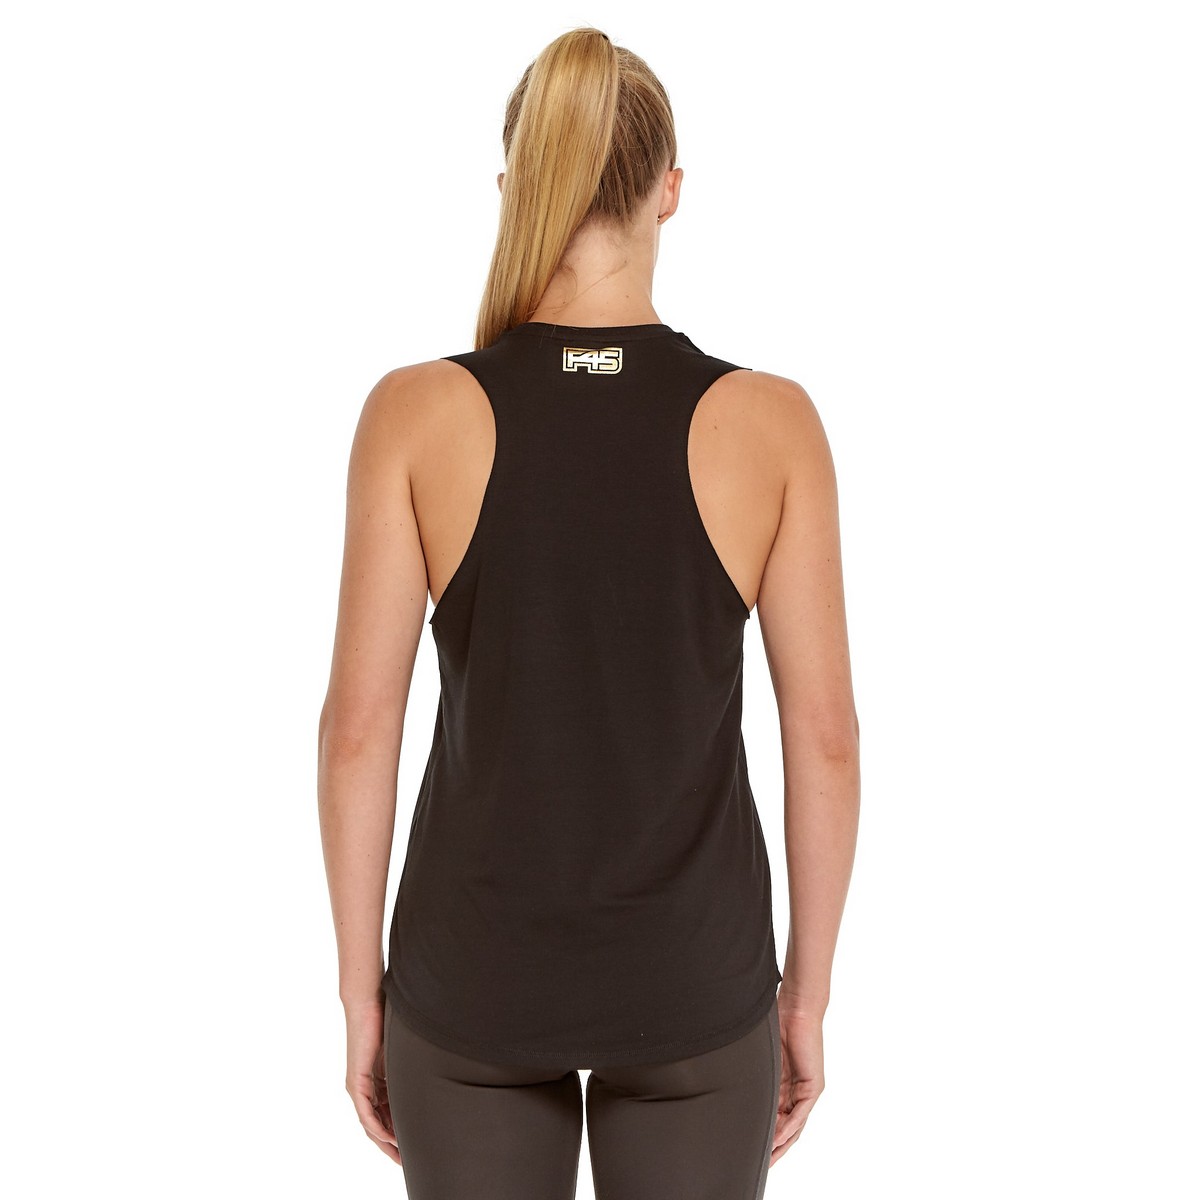 WOMENS HOLLYWOOD TANK - F45 Retail - Concept Partners